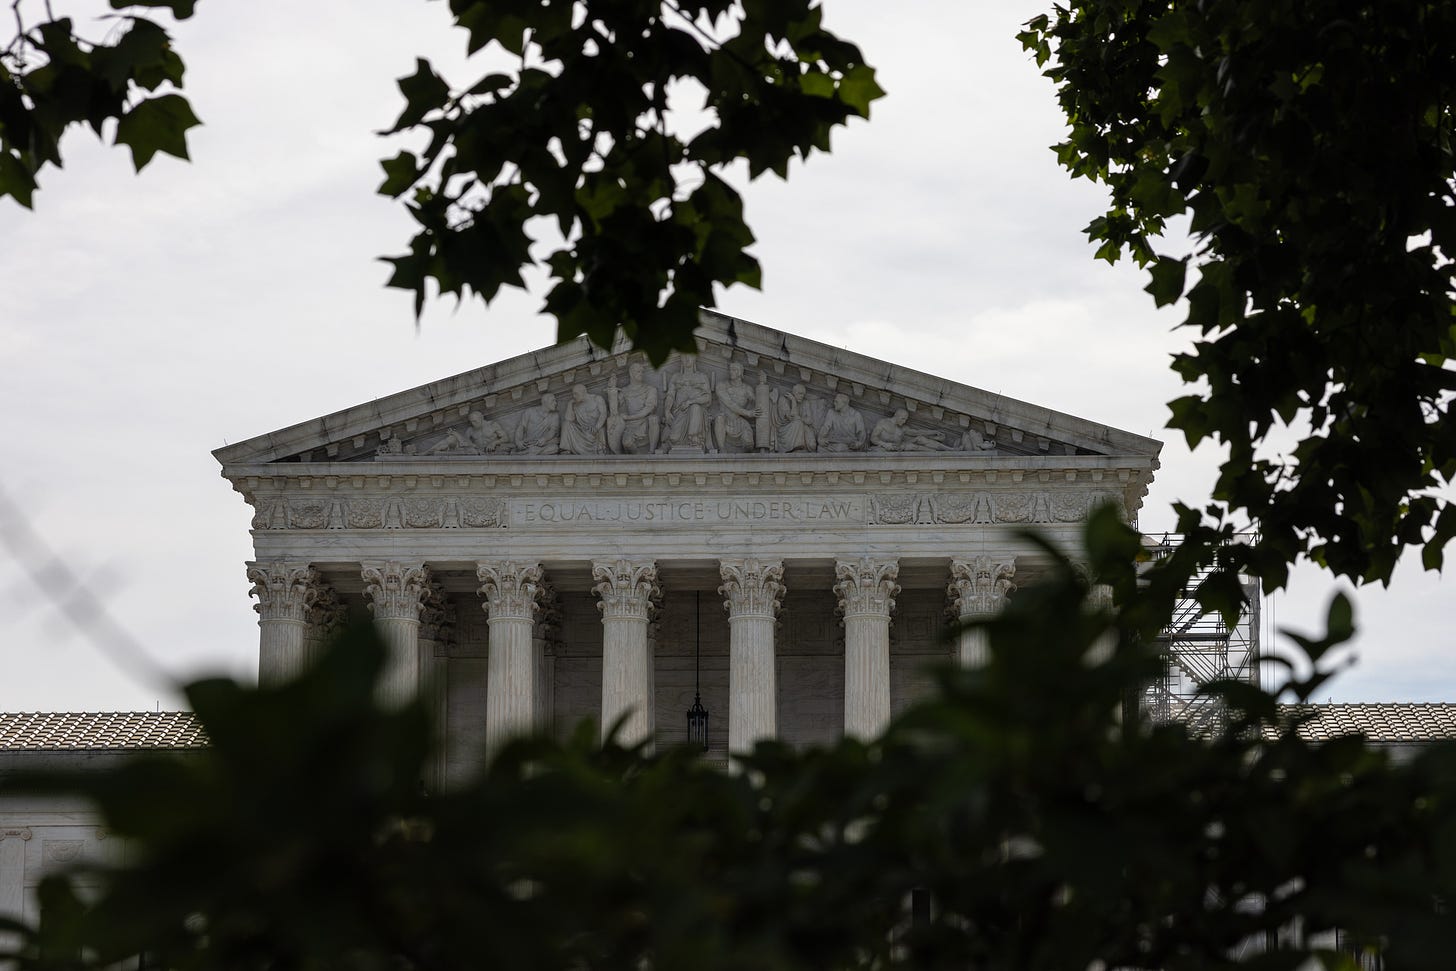 The Supreme Court is seen on June 26 in Washington. Credit: Anna Rose Layden/Getty Images